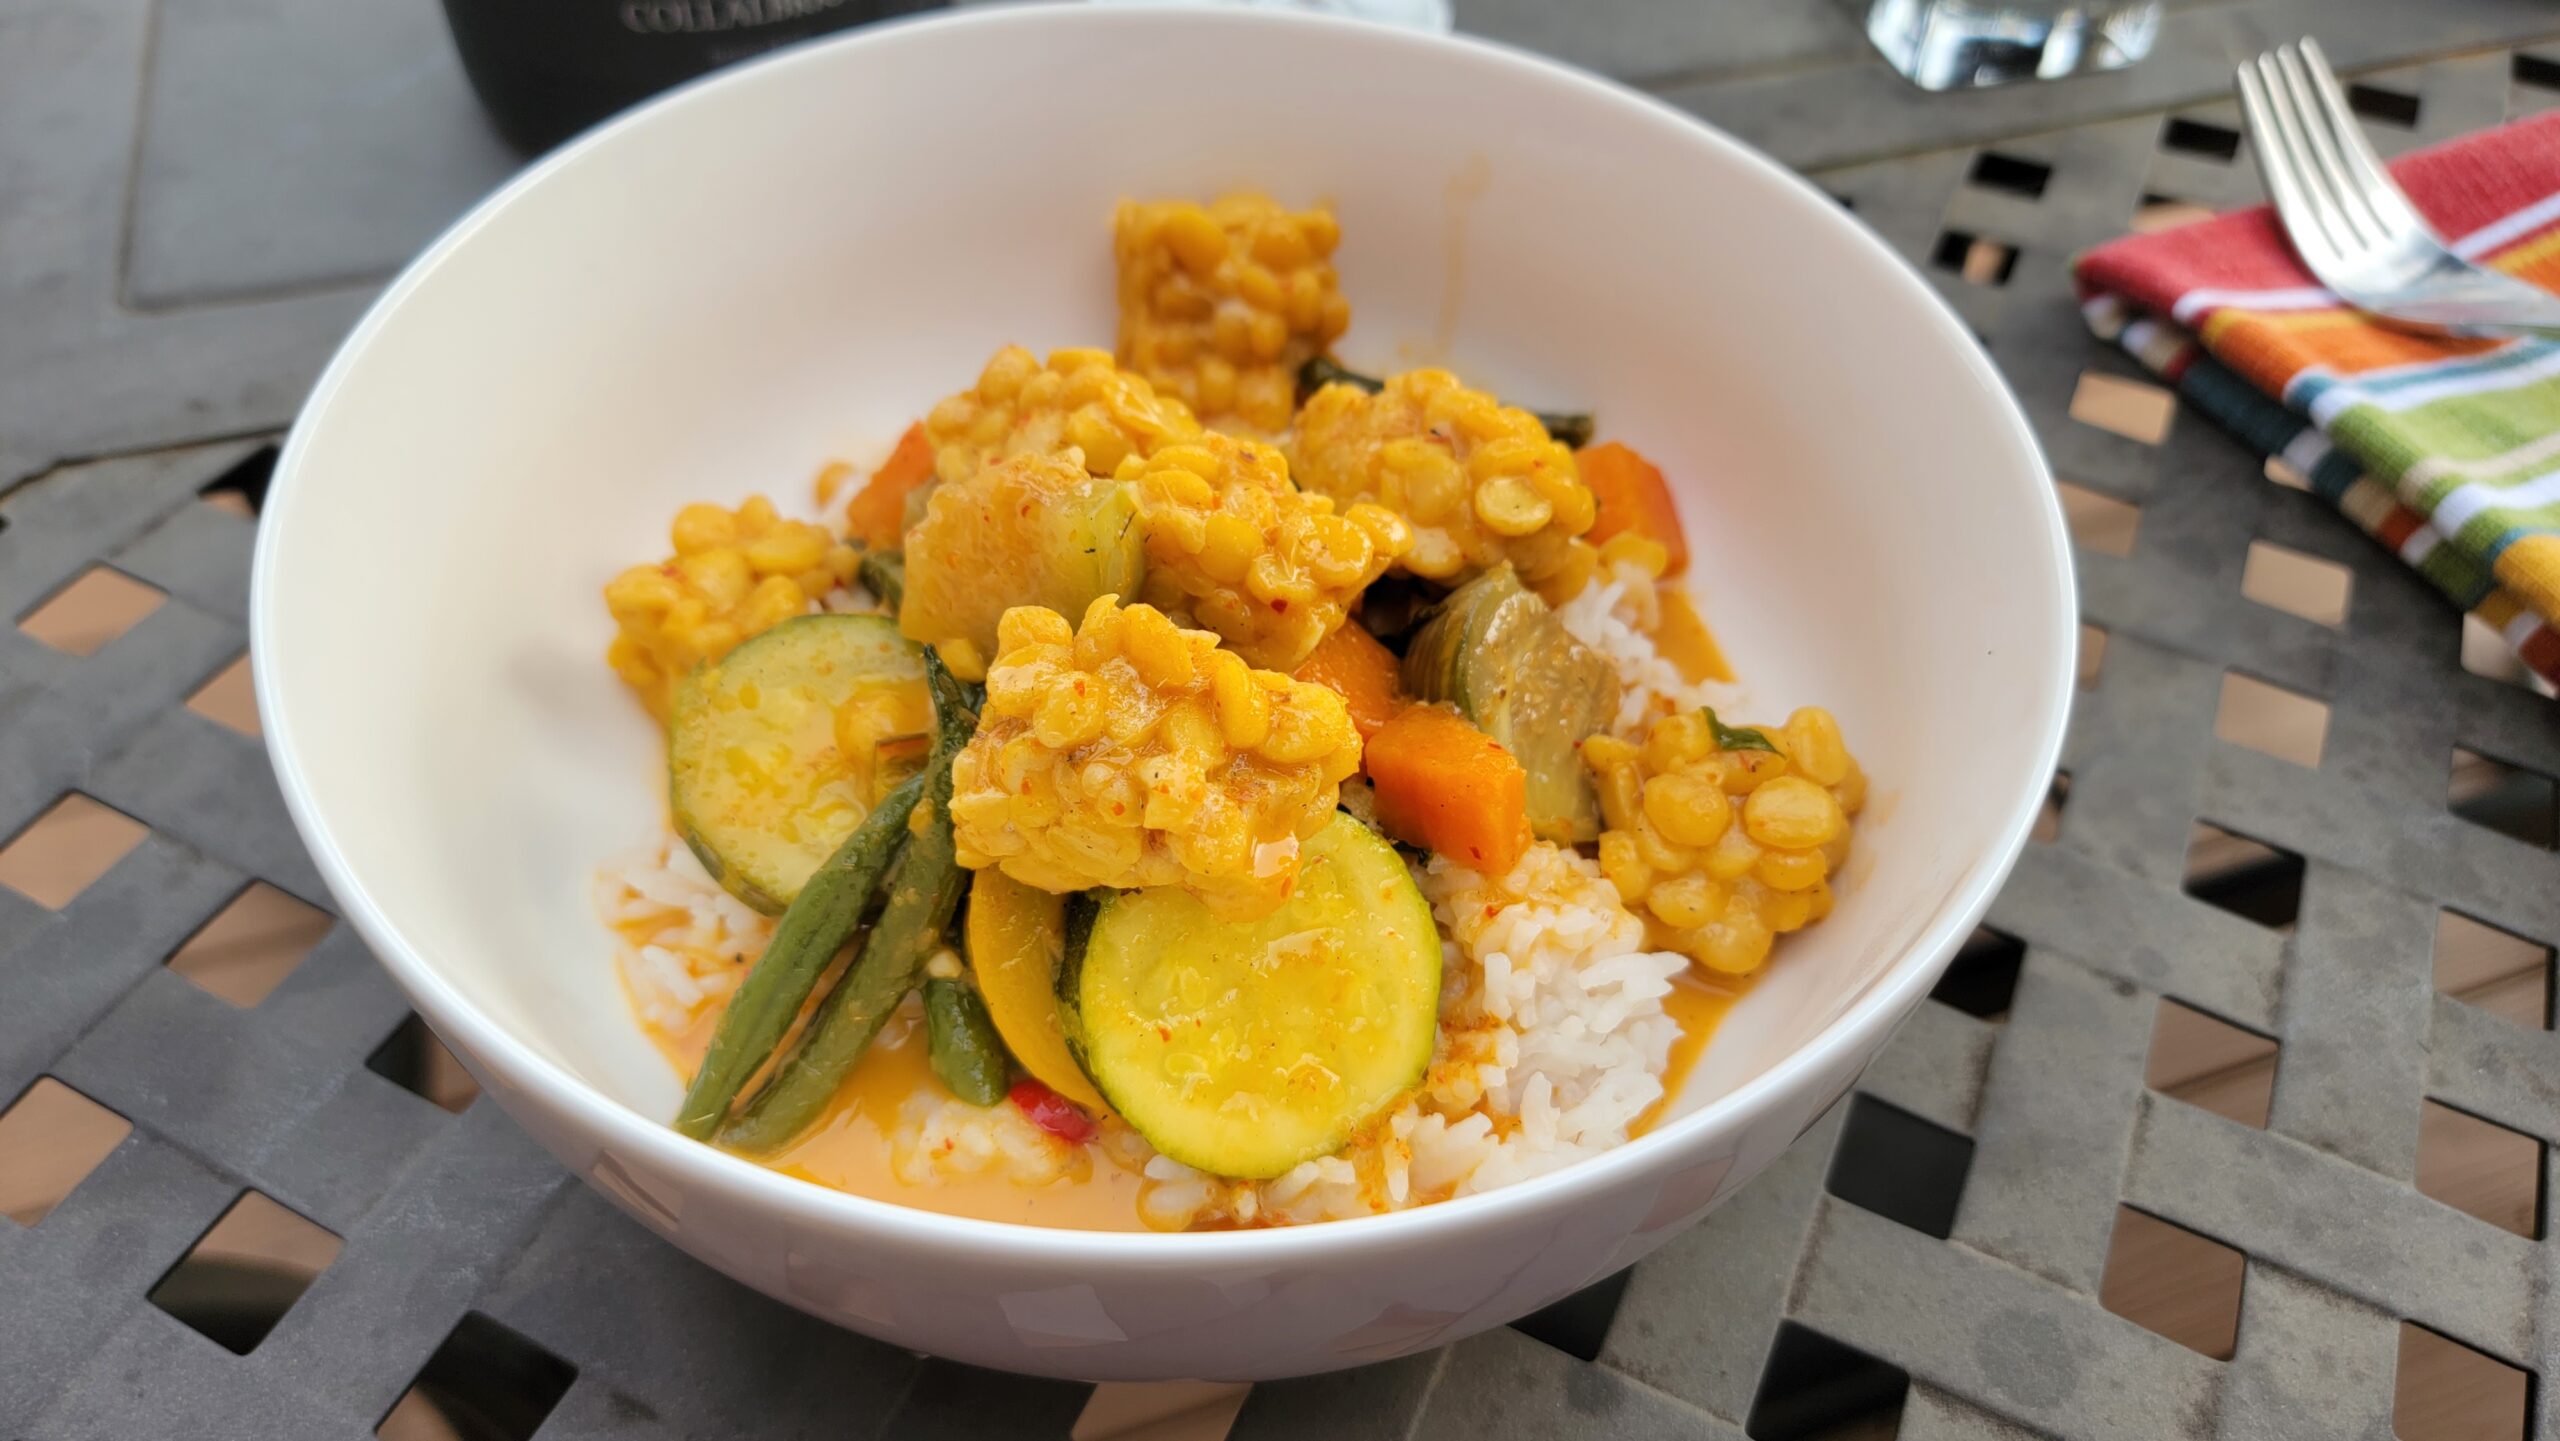 Prosecco Food Pairing - Thai curry